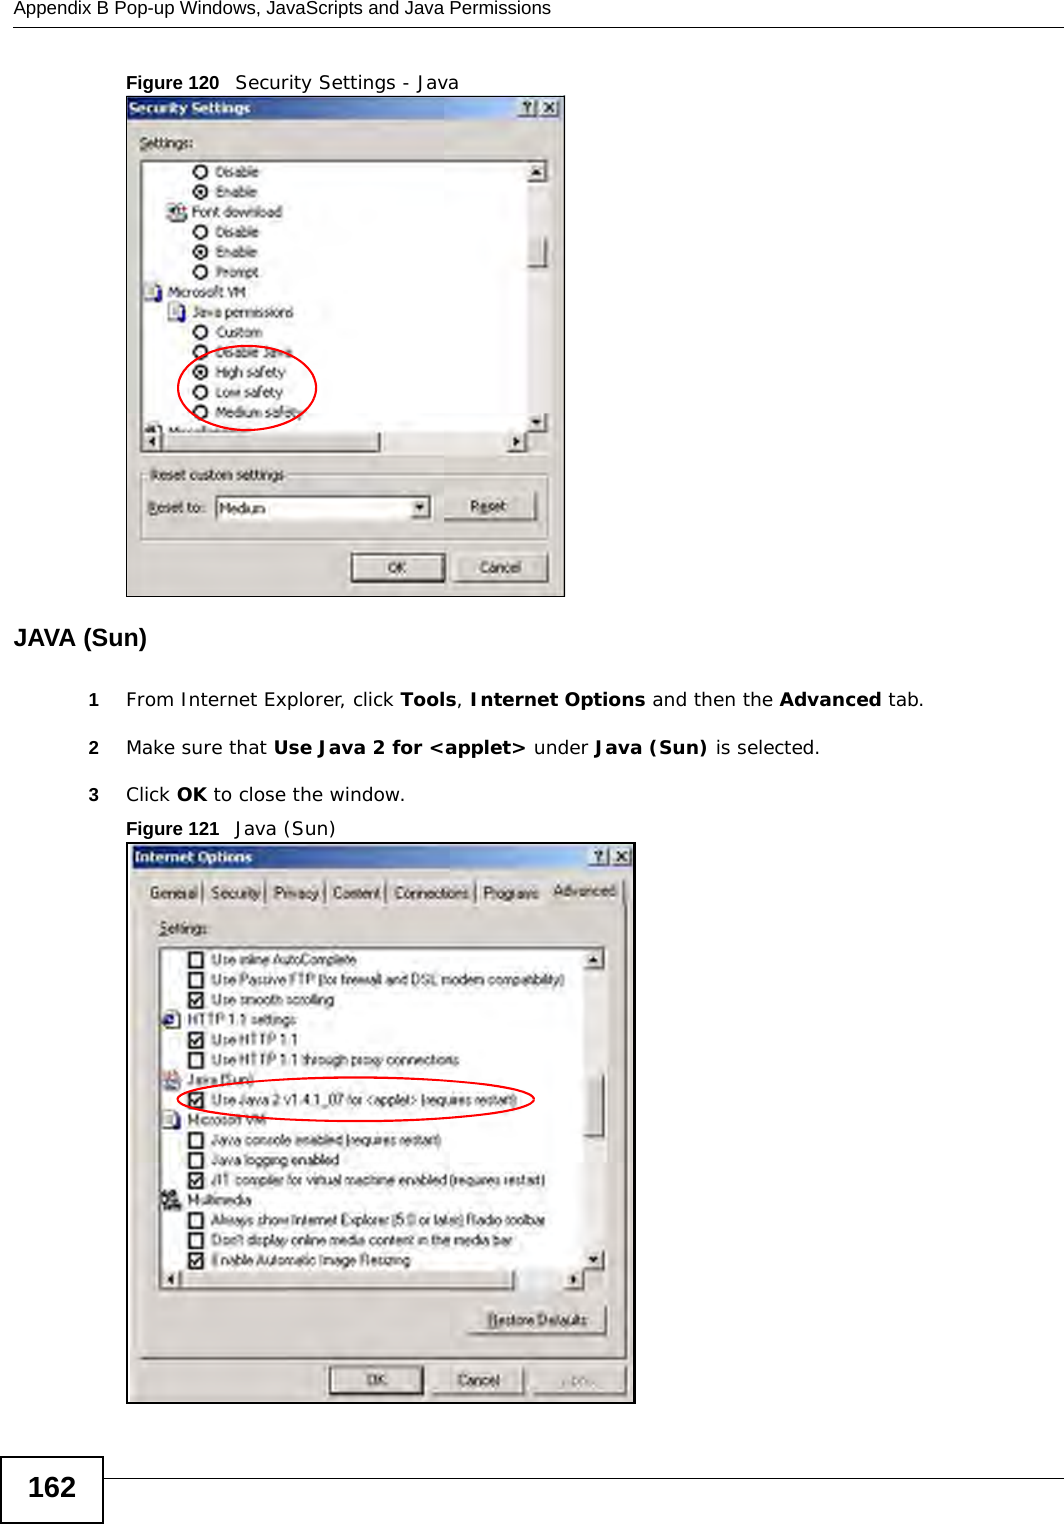 Appendix B Pop-up Windows, JavaScripts and Java Permissions162Figure 120   Security Settings - Java JAVA (Sun)1From Internet Explorer, click Tools, Internet Options and then the Advanced tab. 2Make sure that Use Java 2 for &lt;applet&gt; under Java (Sun) is selected.3Click OK to close the window.Figure 121   Java (Sun)